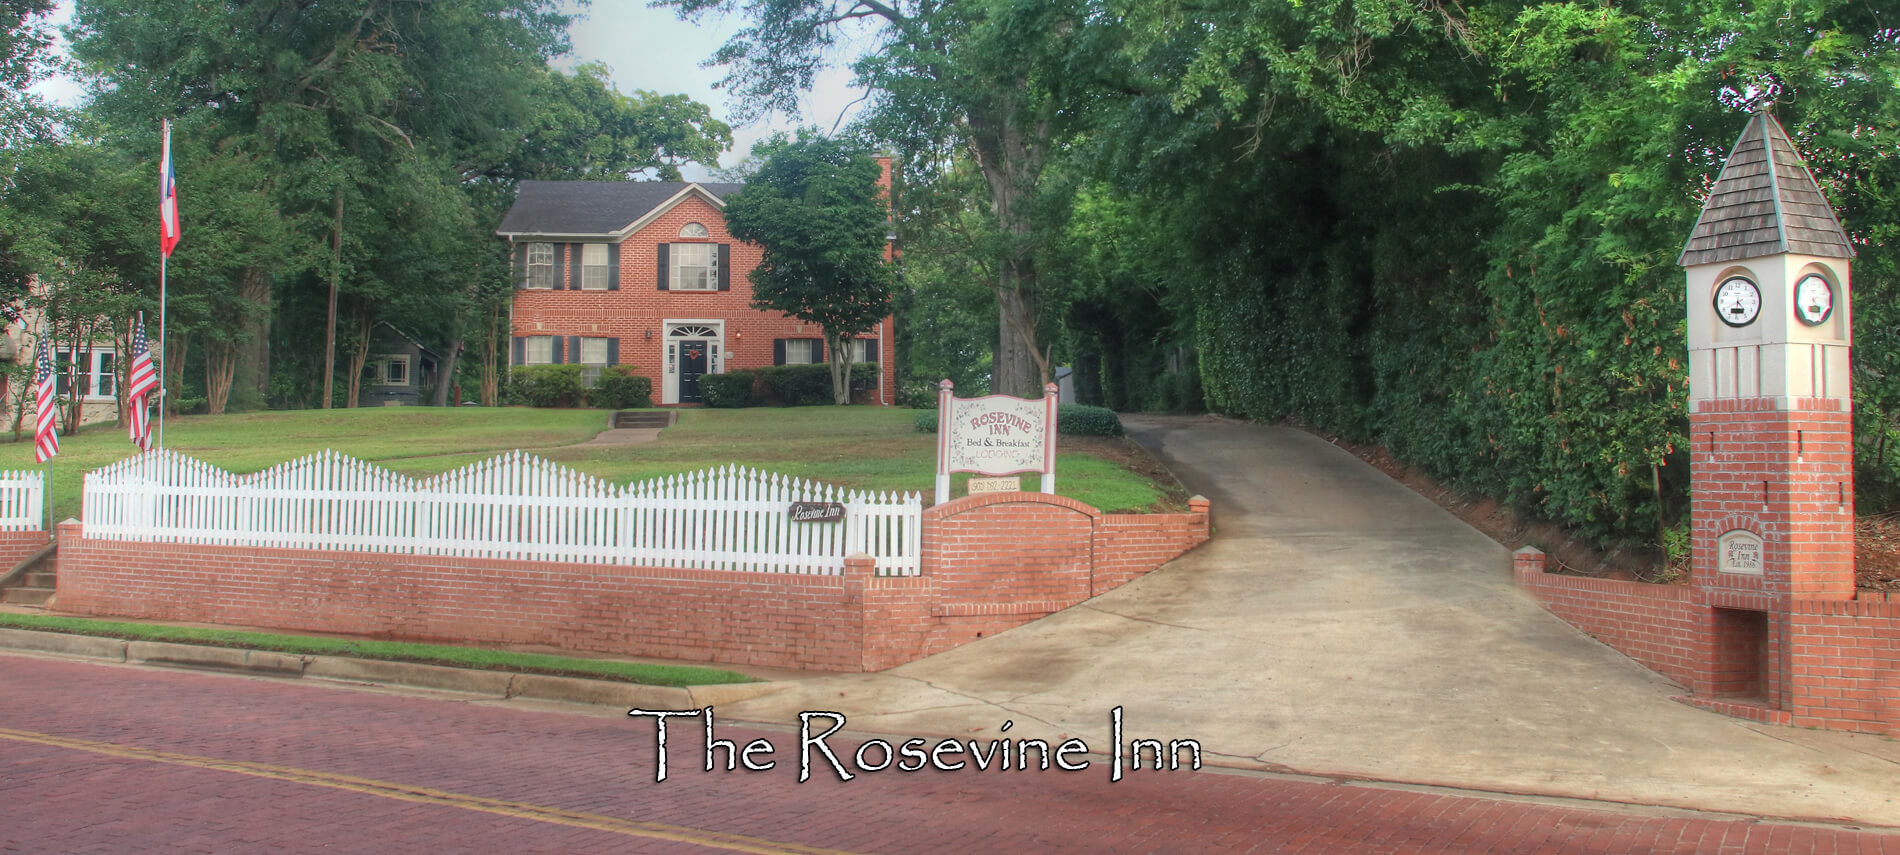 The Exterior of the Rosevine Inn Bed and Breakfast. A two story brick building with a brick clock towner and american flags